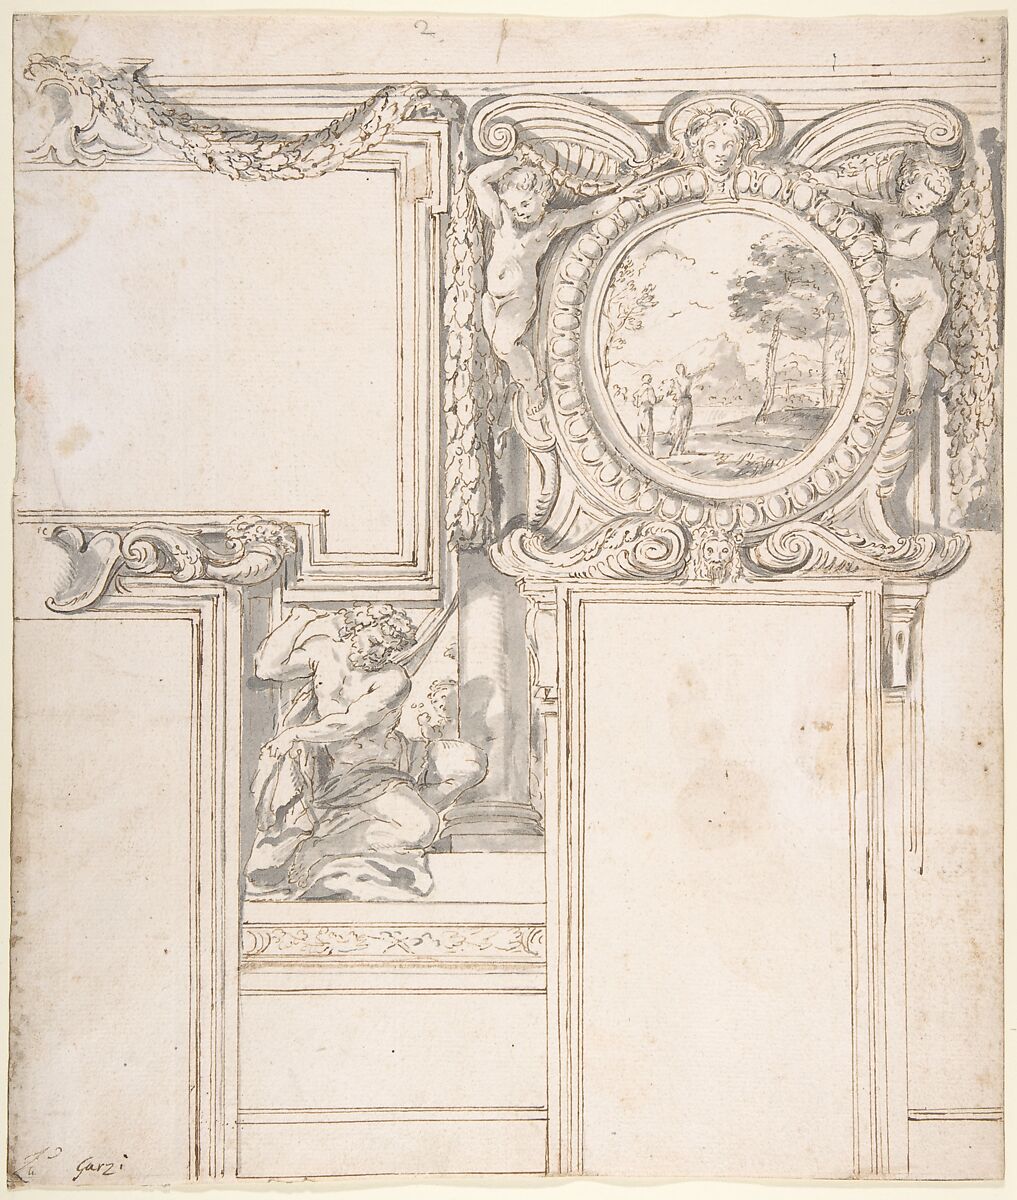 Design Wall Elevation with Stucco and Painted Decorations, Luigi Garzi (Italian, Pistoia 1638–1721 Rome), Pen and brown ink with gray wash 